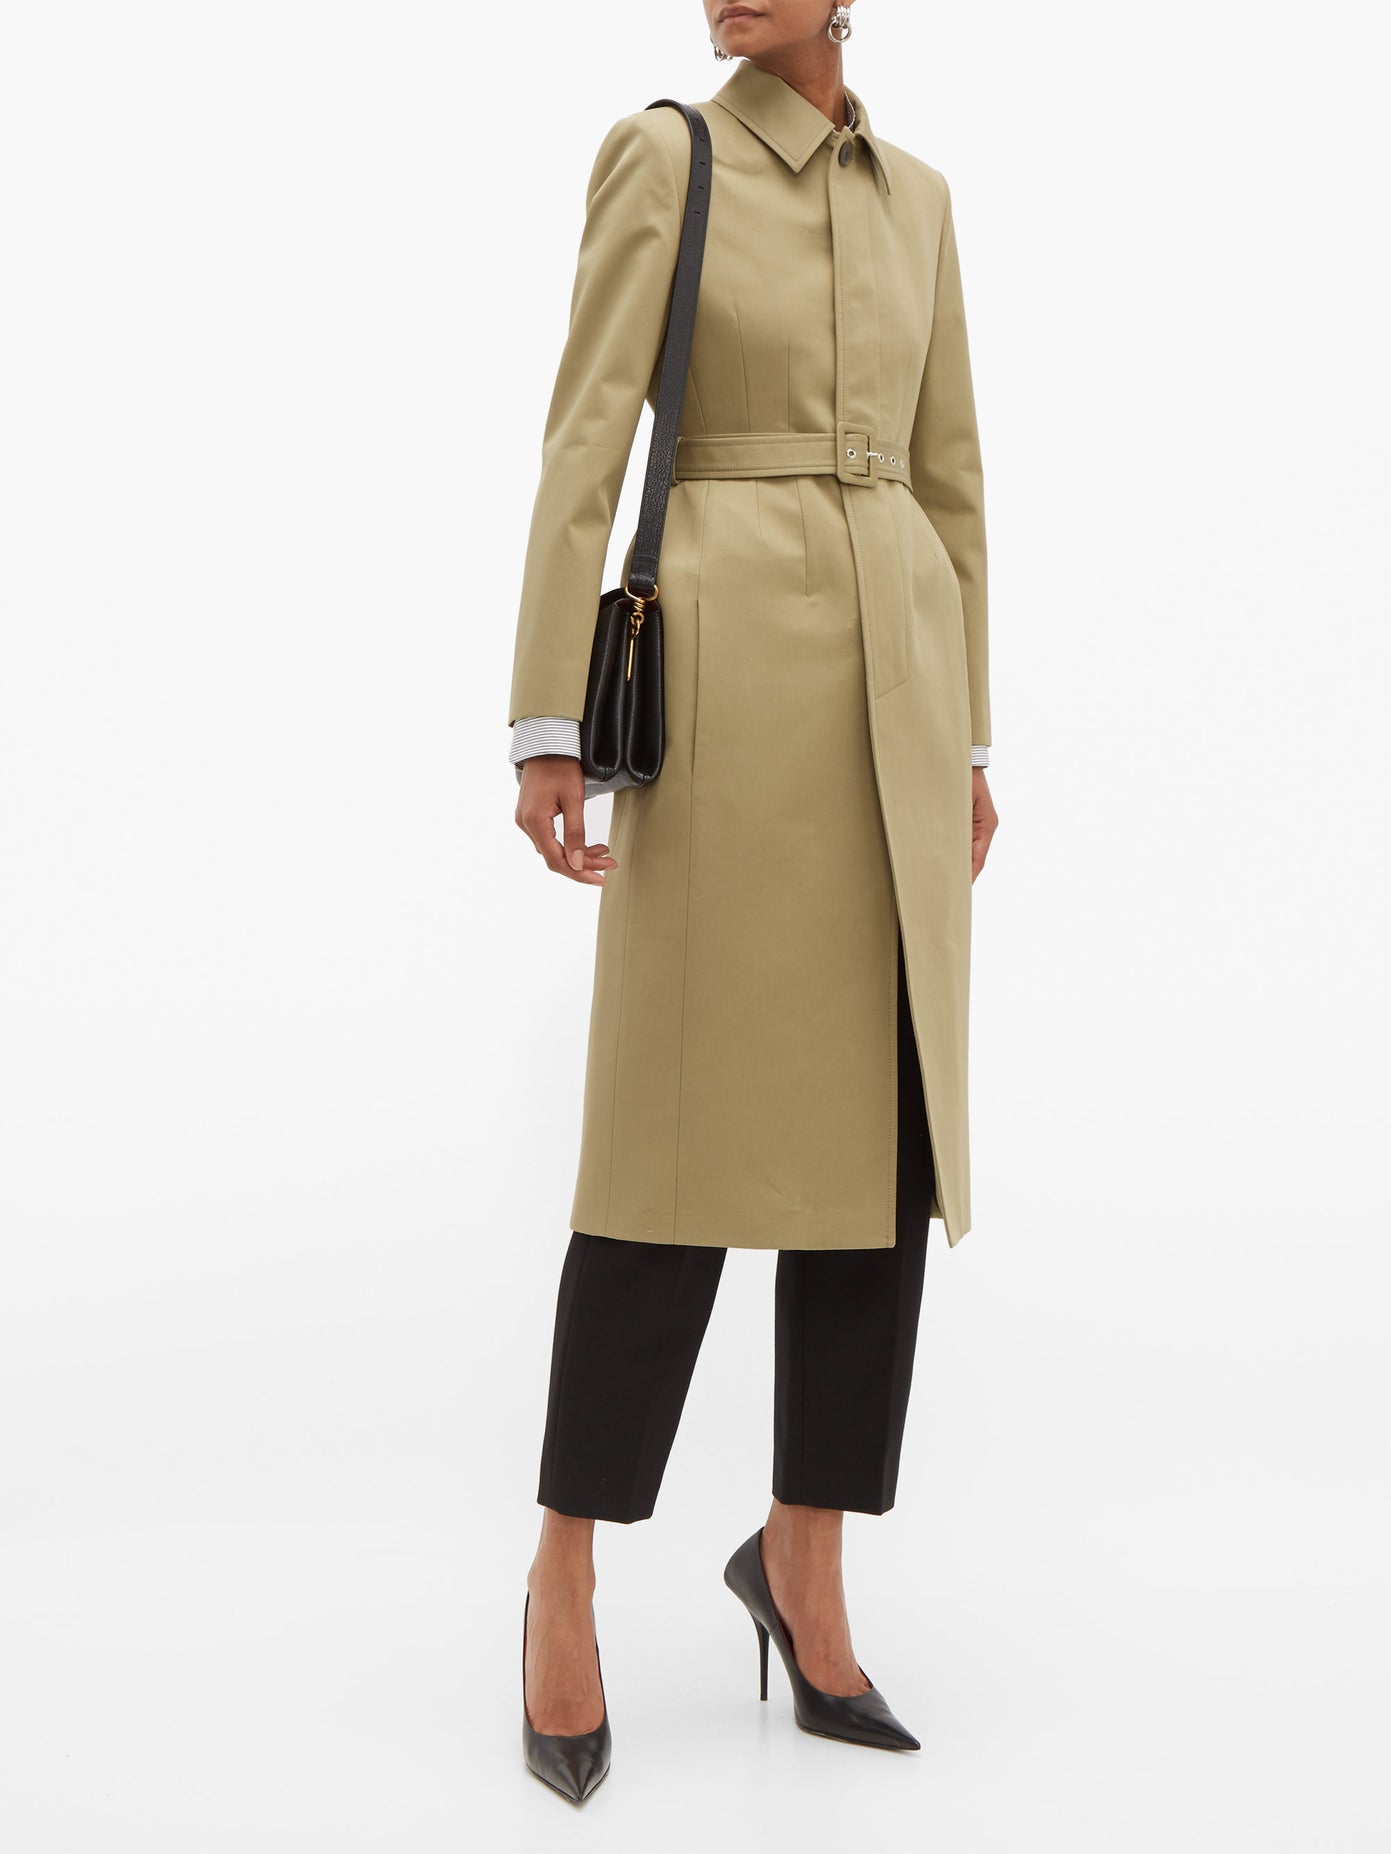 Balenciaga - Hourglass Belted Cotton-Gabardine Trench Coat | ABOUT ICONS